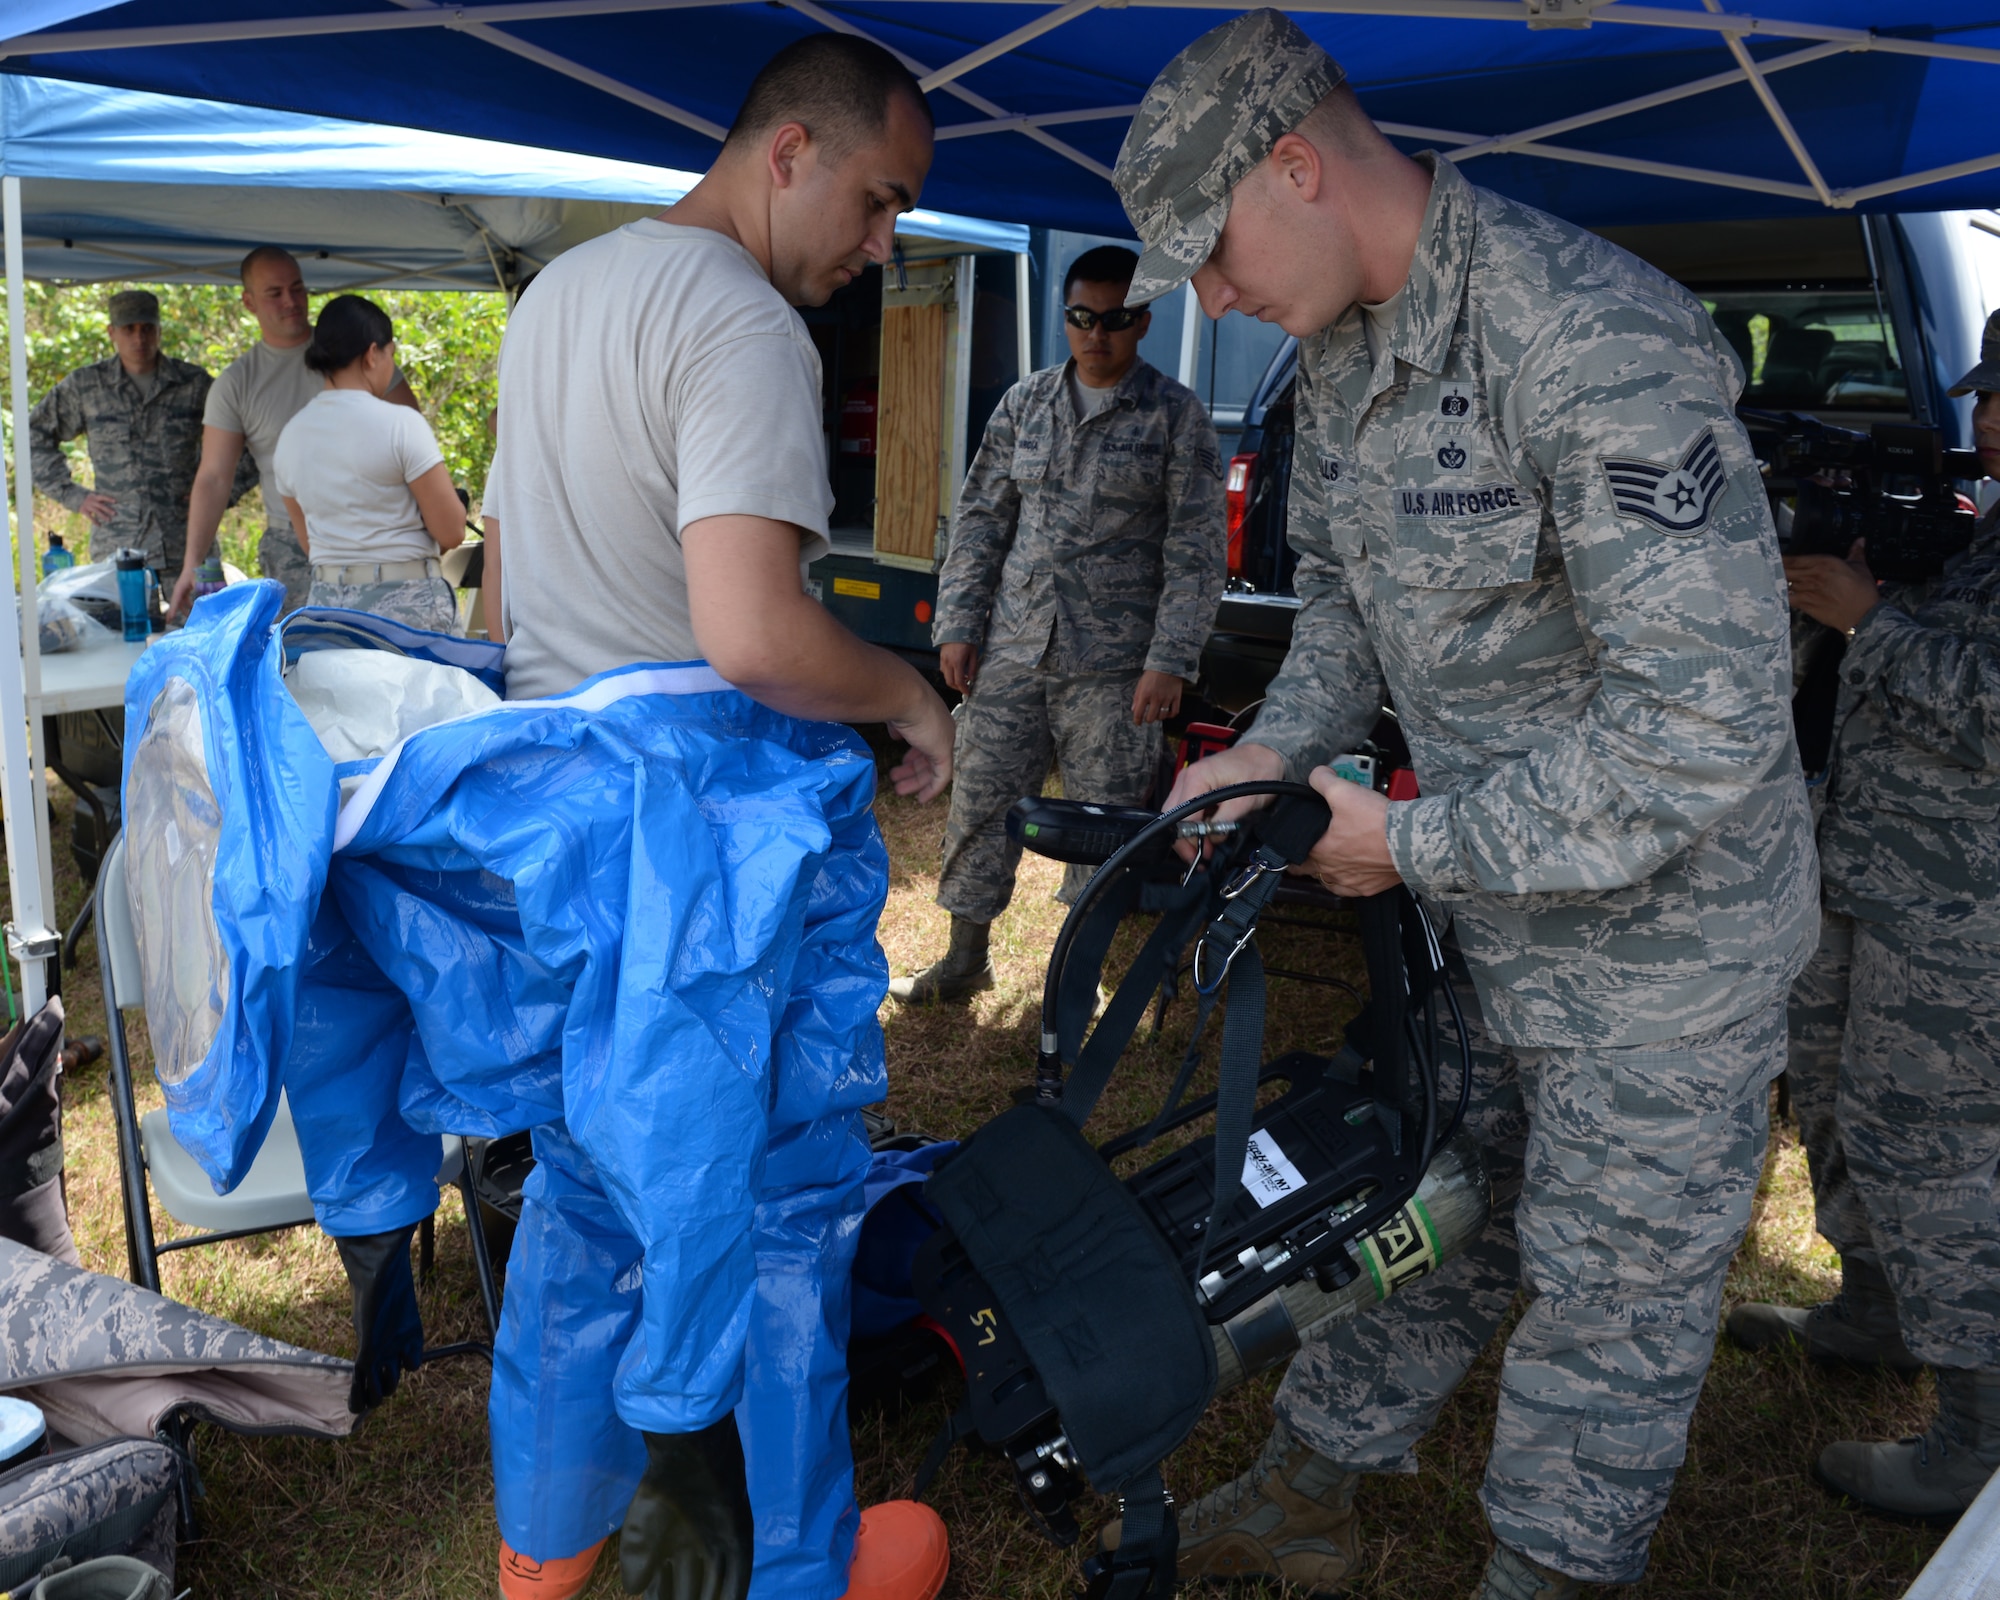 Staff Sgt. Adam Hills, 36th Civil Engineer Squadron, Emergency Management Flight, helps a member of the bioenvironmental team put on gear before performing an exercise during the Philippine Delegation visit Feb. 27, 2015, at Andersen Air Force Base, Guam.  Teams from the Explosive Ordinance Disposal flight, fire prevention and response, emergency management and medical all participated in the exercise that was hosted by the 36th CES for members of the Armed Forces of the Philippines. (U.S. Air Force photo by Senior Airman Cierra Presentado/Released)